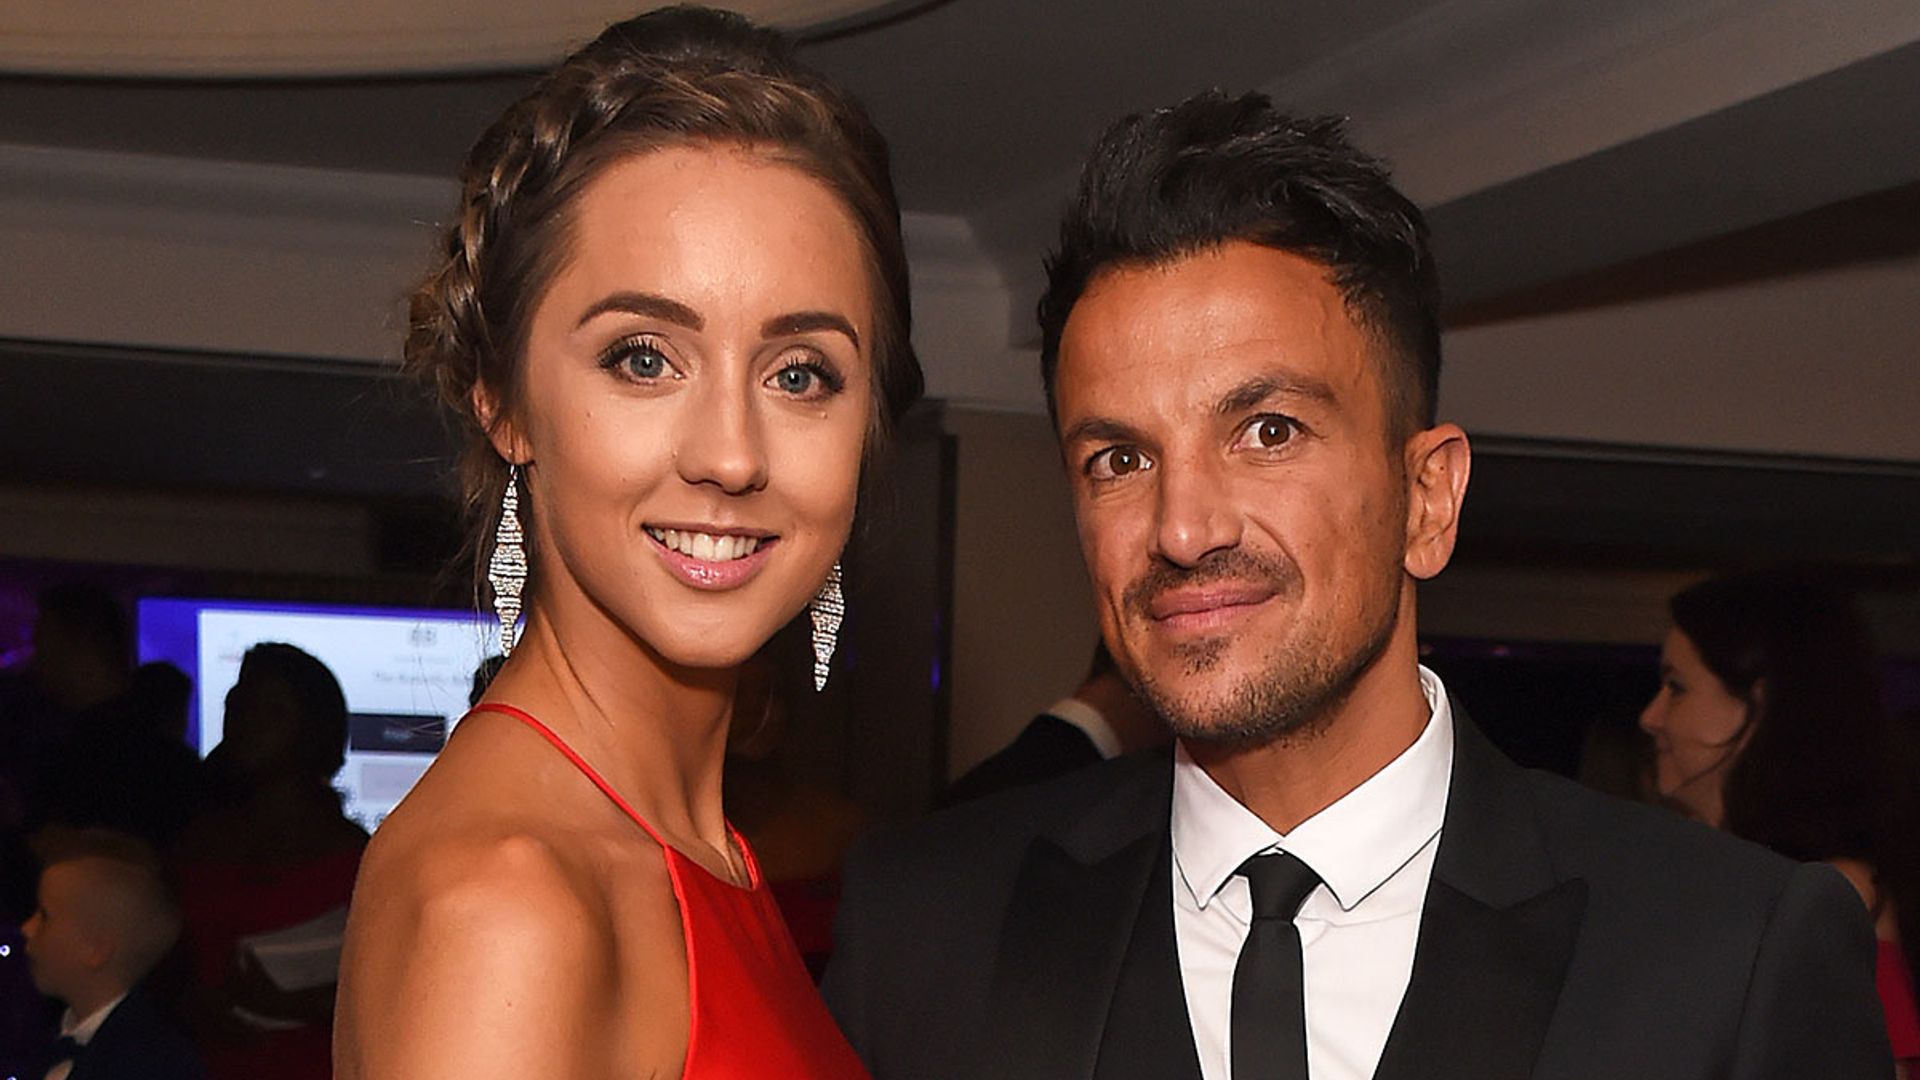 peter-andre-emily